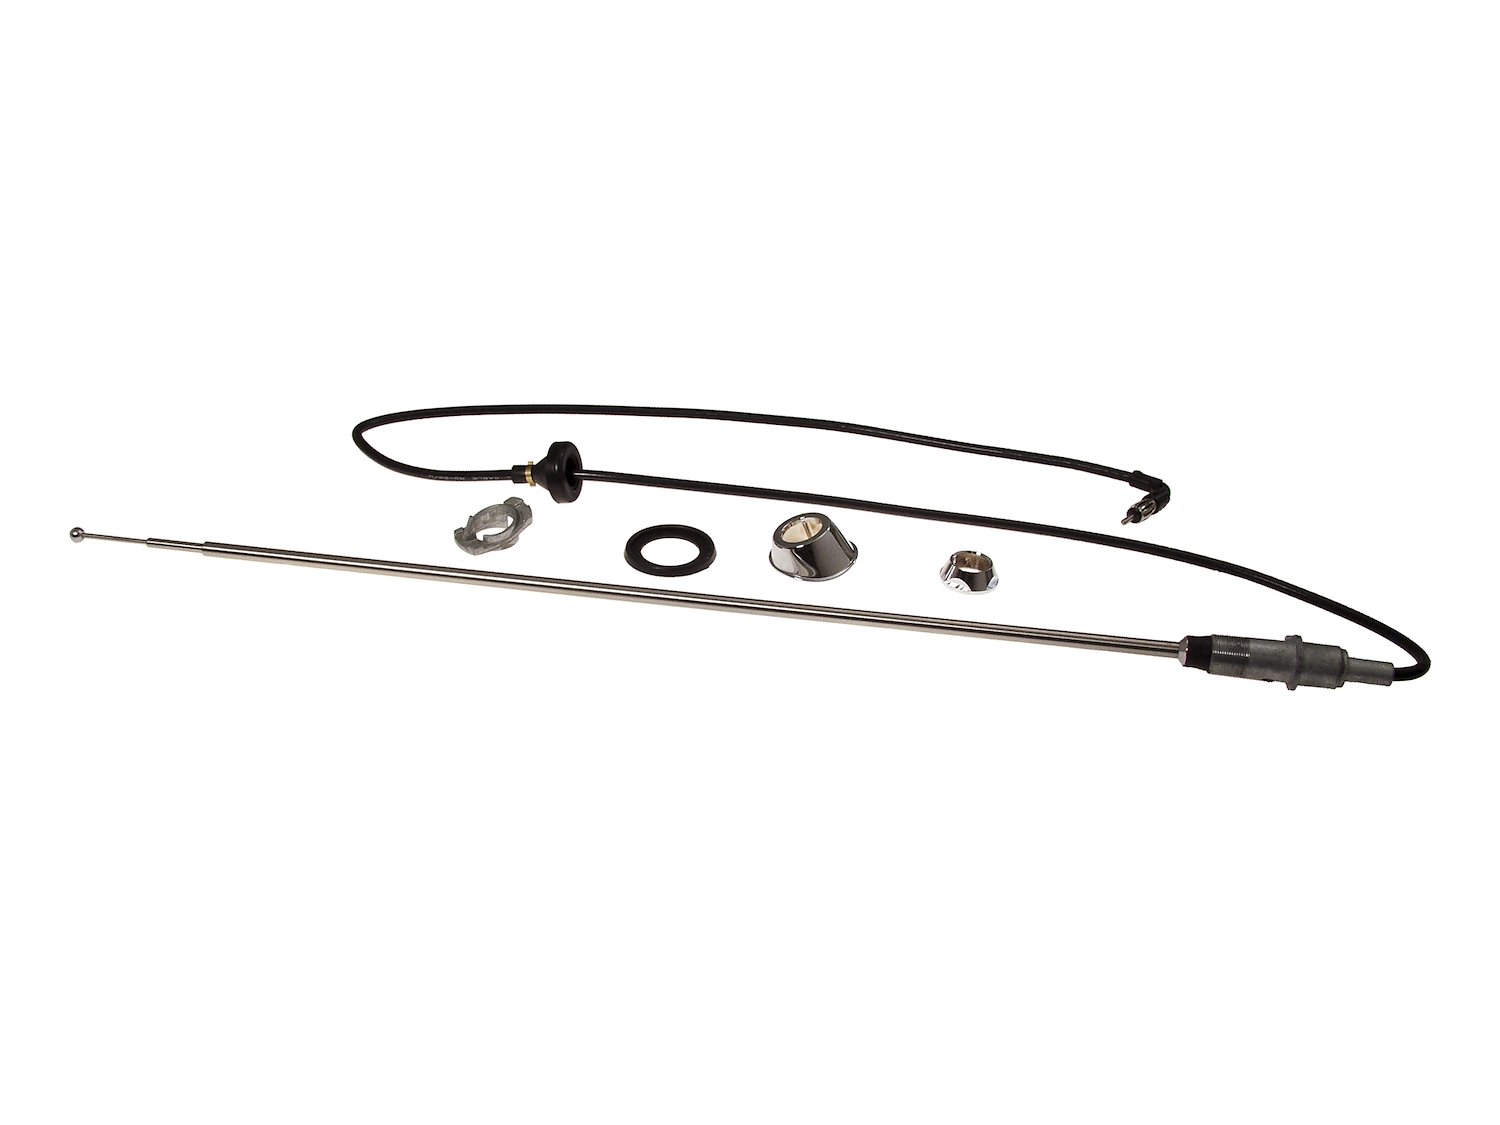 Antenna - OE-Style for 1964-1965 Ford Falcon